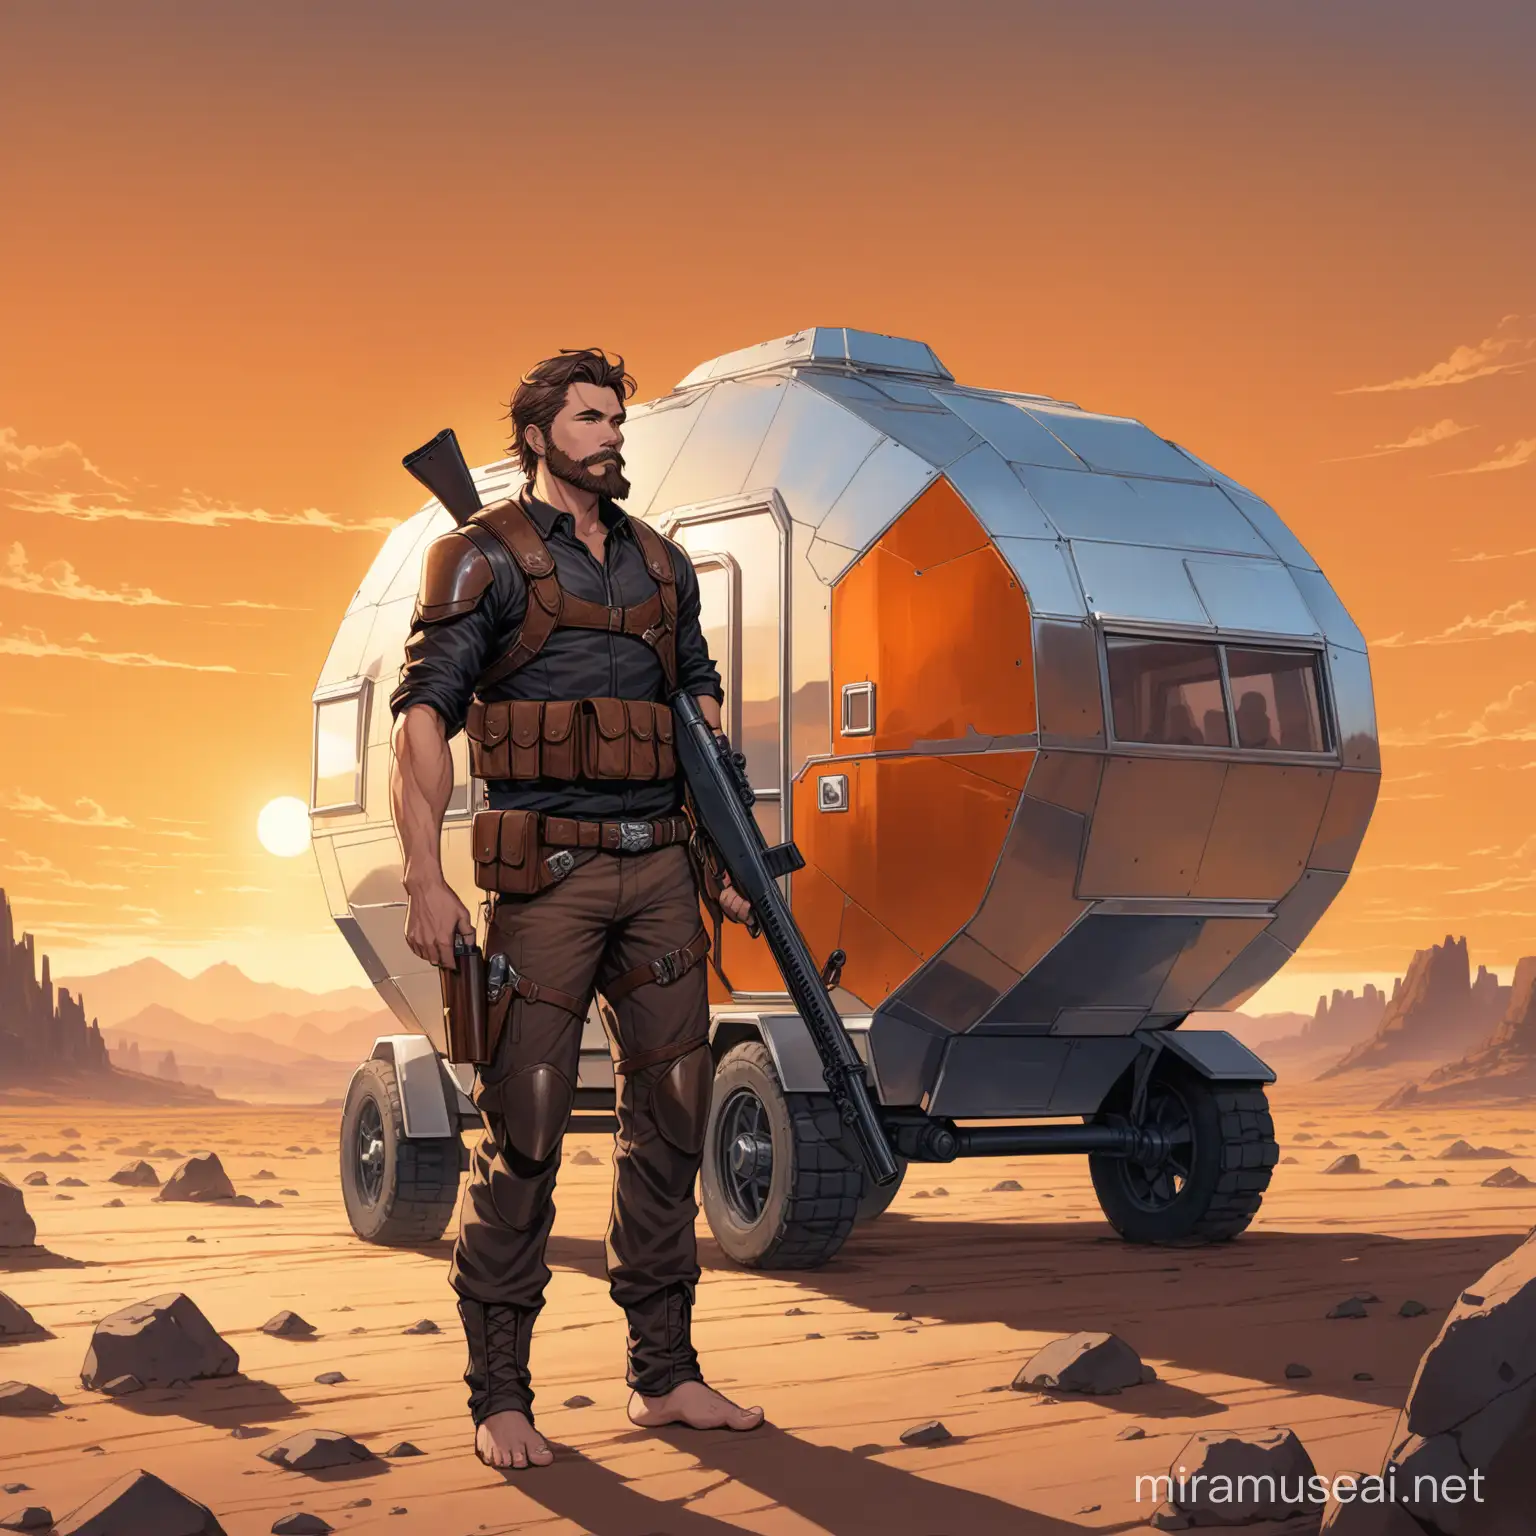 barefooted western gunslinger wearing leather armoured coat and rolled up cargo pants. He has brown hair and a brown short beard. he is tall and of a bulky muscular stature. He is carrying a stubby sawn off shotgun and he has a rifle on his back. he is standing in front of a hyper futuristic metallic caravan. The background is a dusty, dry, rocky landscape with nothing else in sight for miles. the lighting is dusk and there is a beautiful orange sunset. it is moody in style
